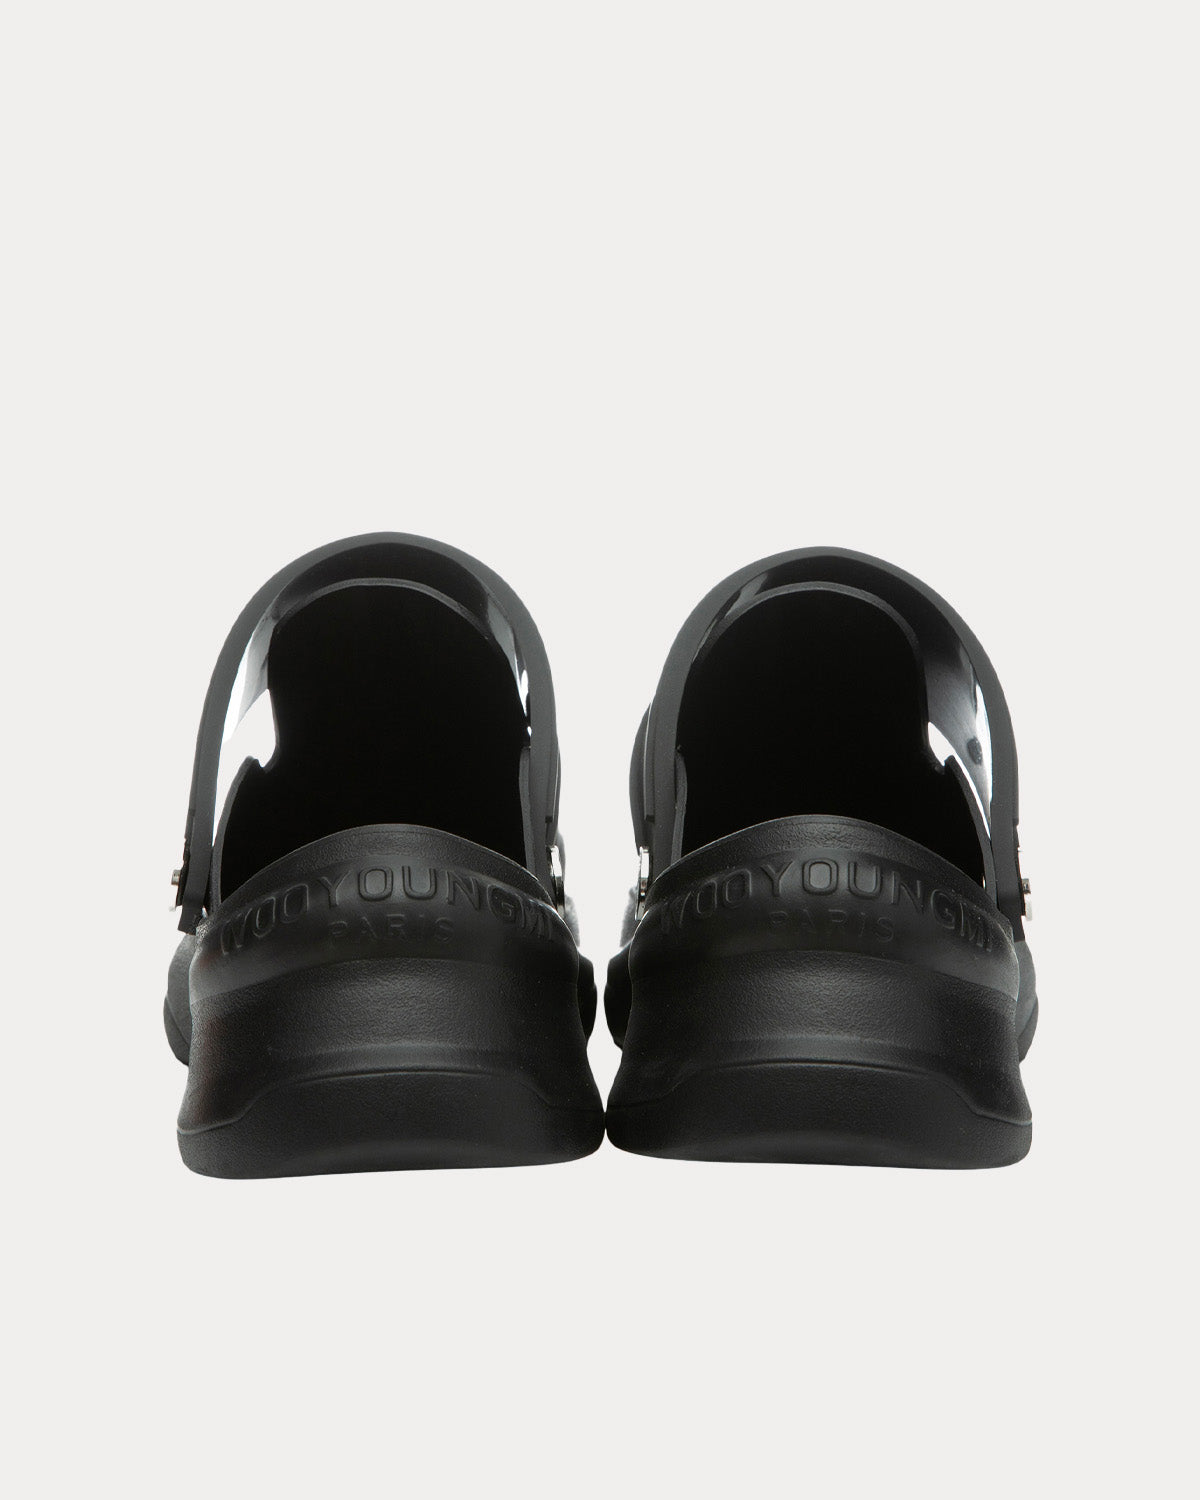 Wooyoungmi - Slingback Leather Black Clogs